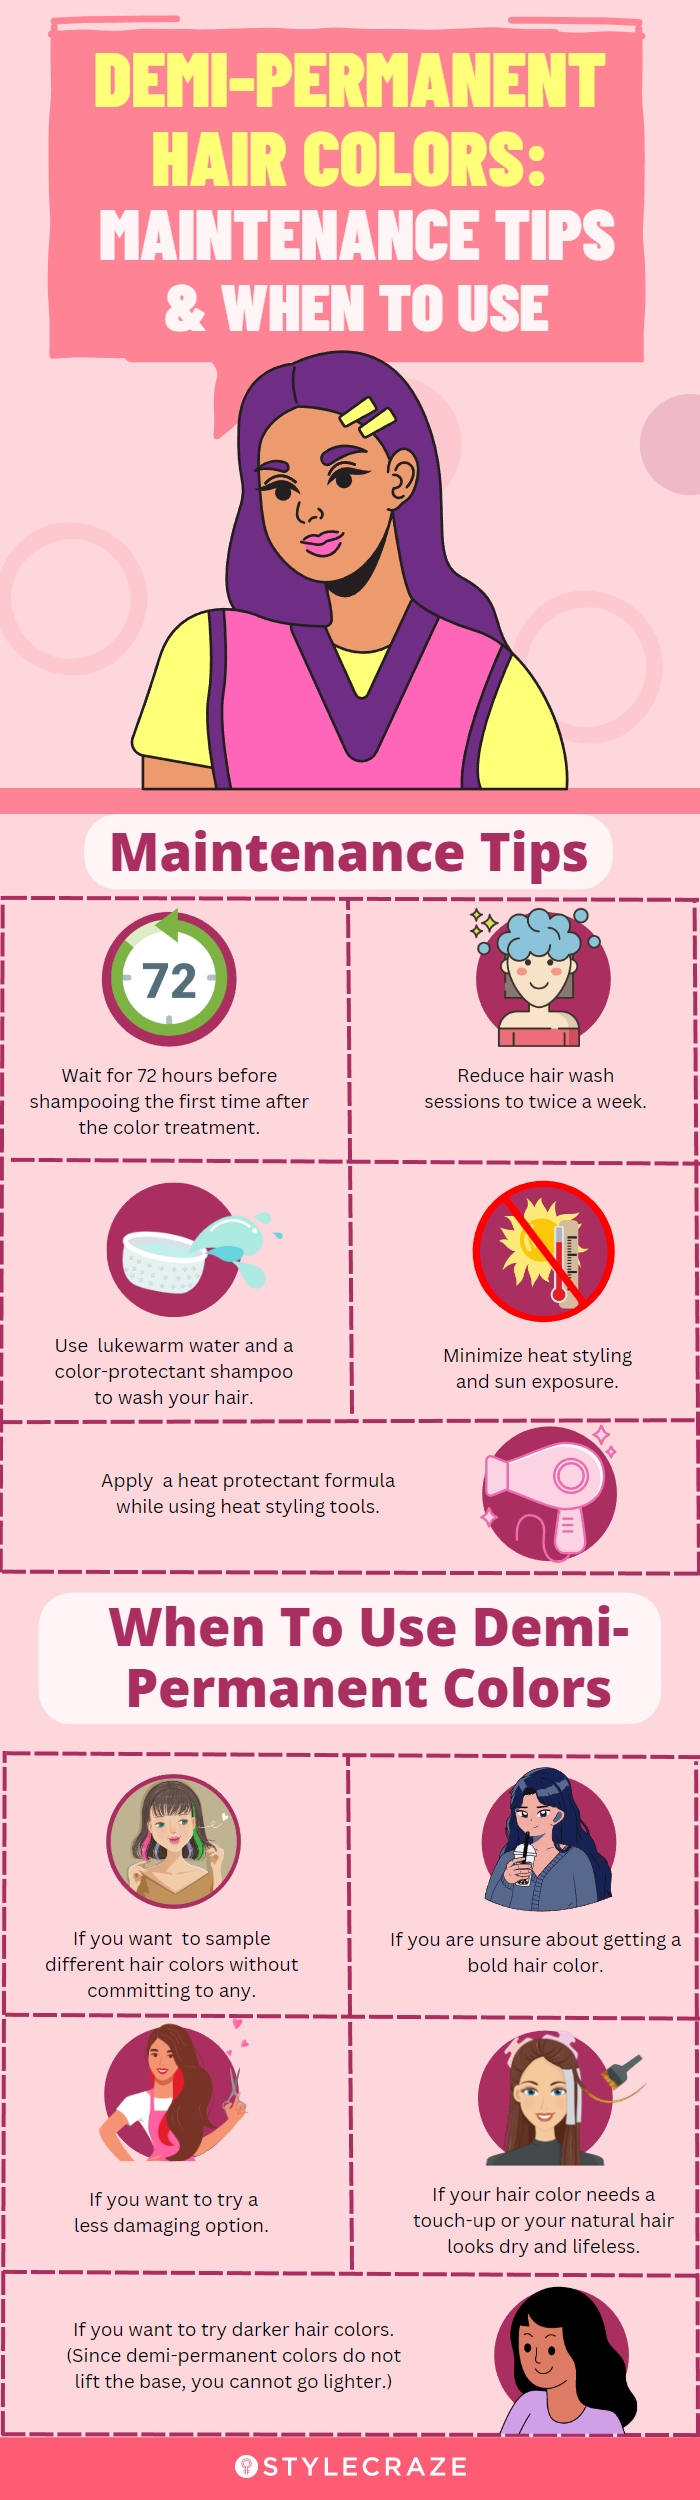 Demi-Permanent Hair Colors: Maintenance Tips & When To Use (infographic)